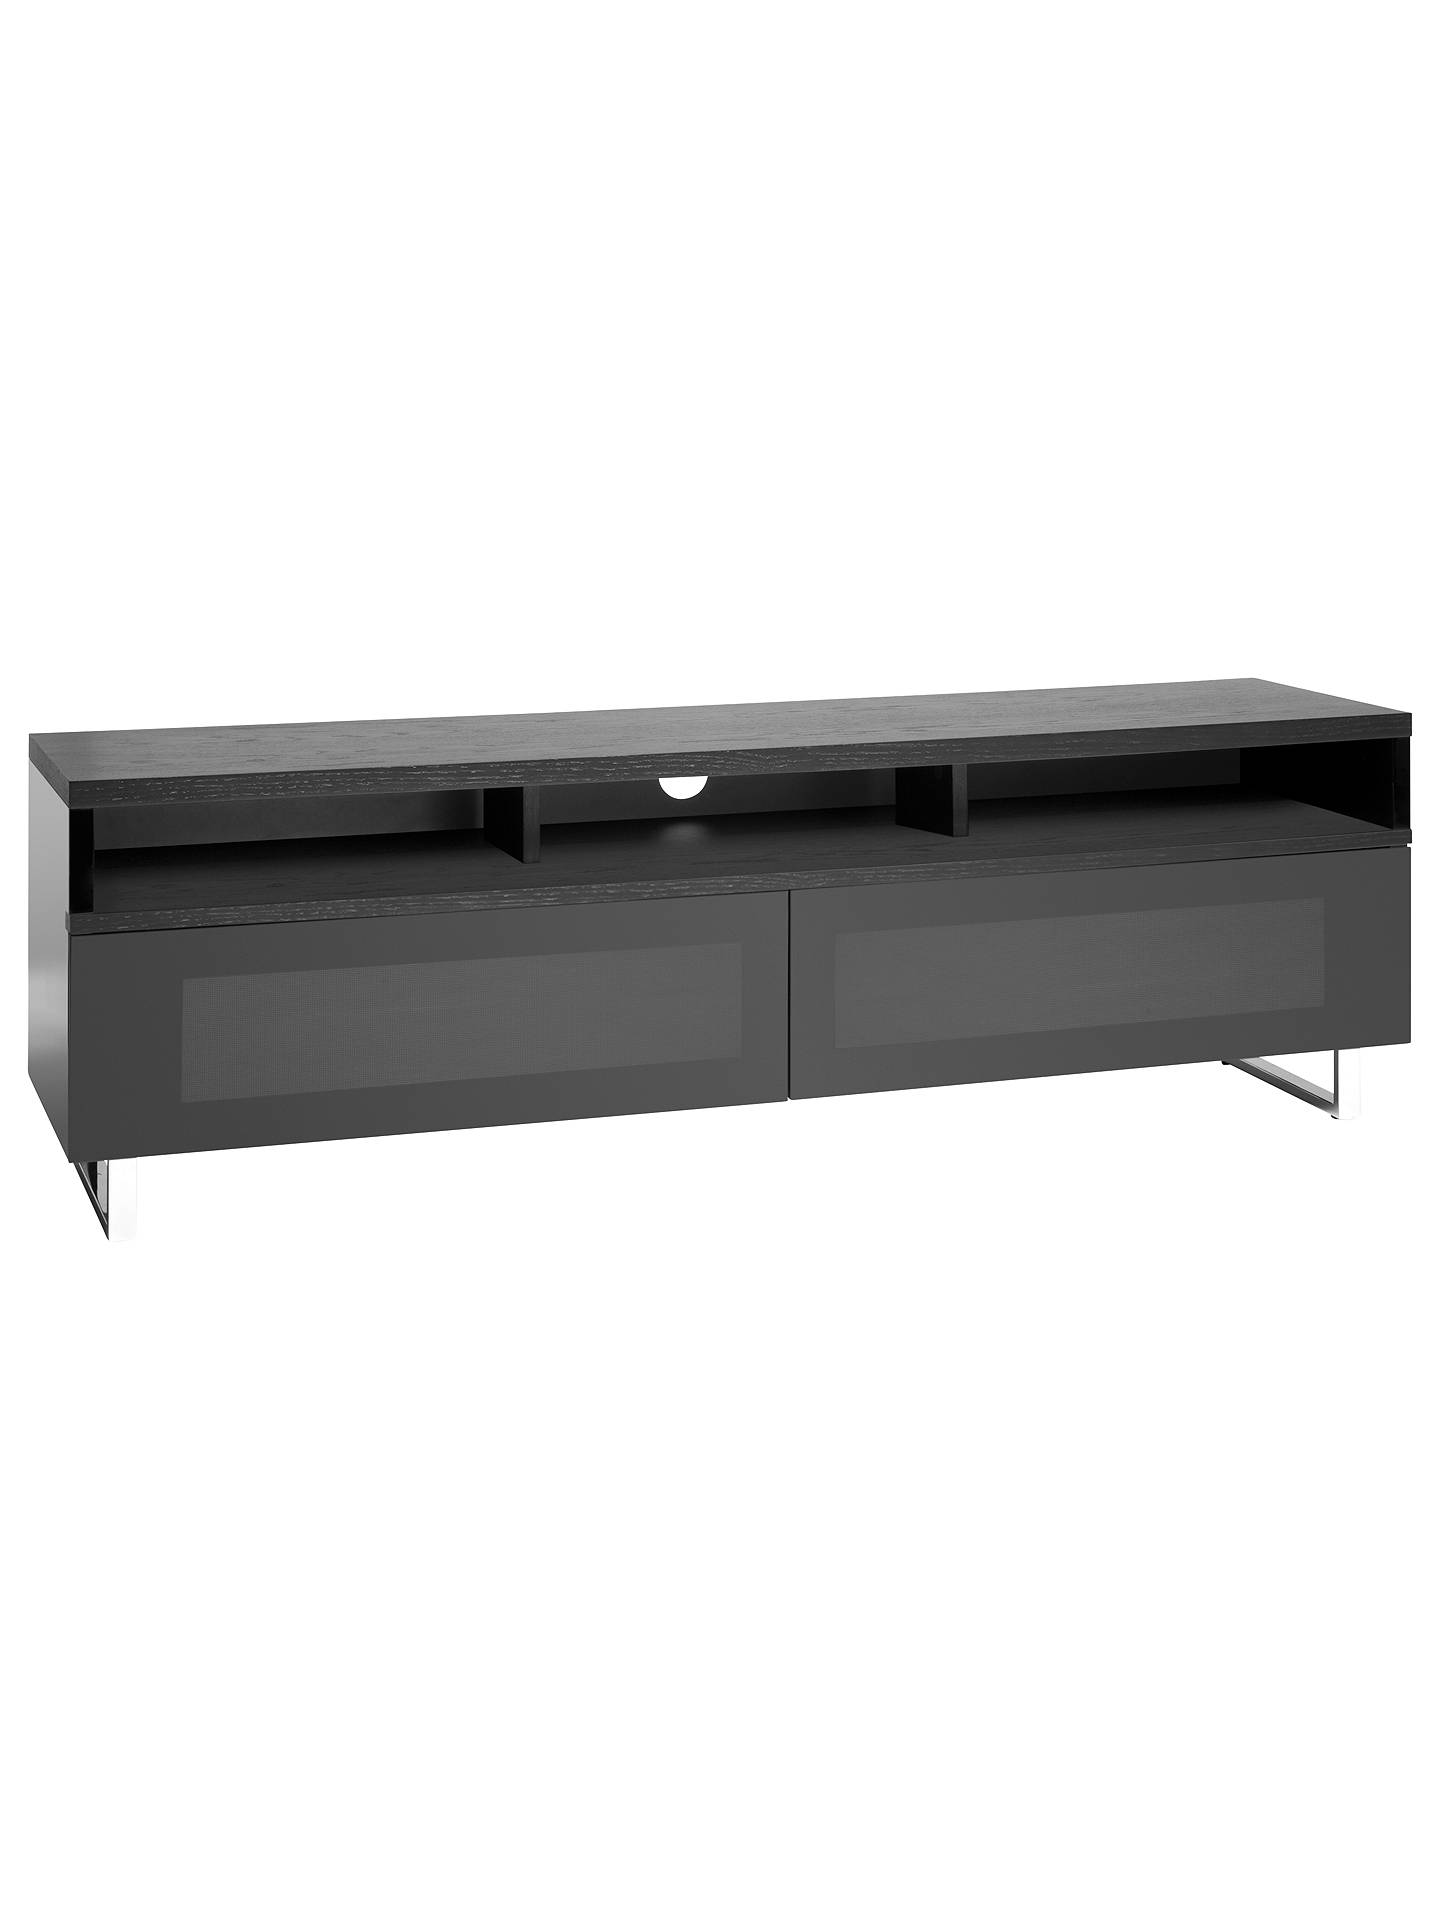 Techlink Panorama PM160+ TV Stand for TVs up to 80" at ...